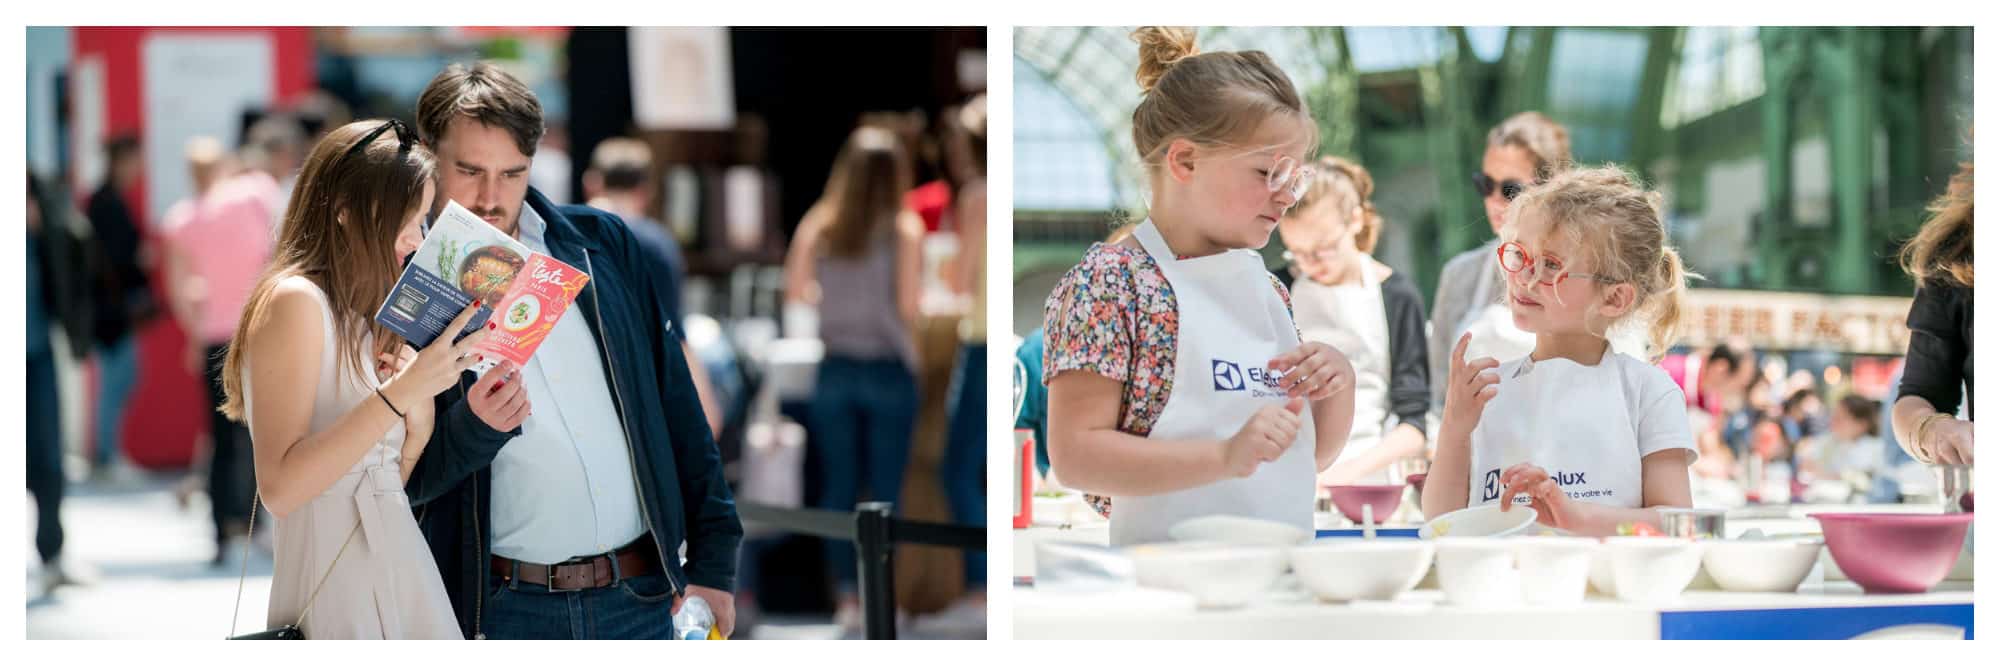 The annual food festival Taste of Paris takes place each May in Paris where people come to explore the different stalls (left) and there are also kids' workshops (right).